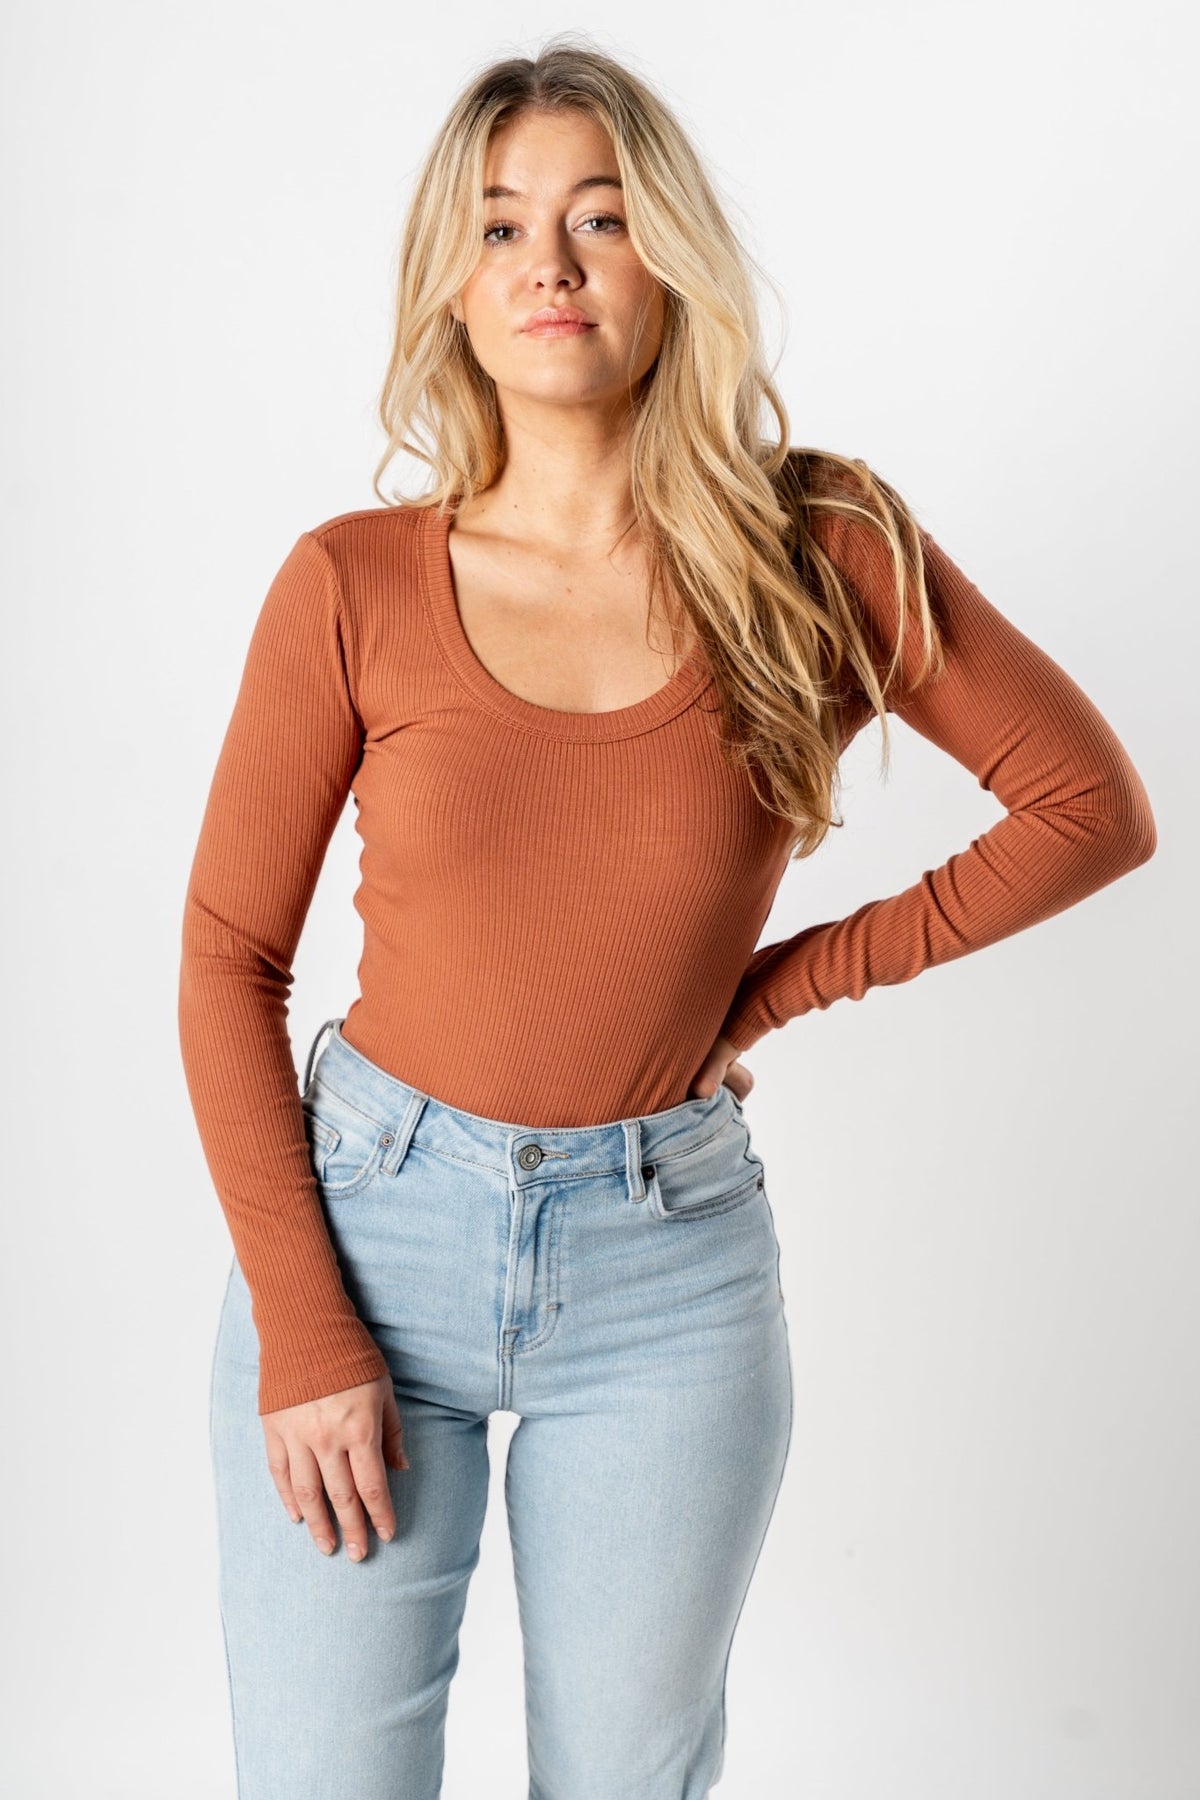 Z Supply Lilah long sleeve bodysuit penny - Z Supply bodysuit - Z Supply Tops, Dresses, Tanks, Tees, Cardigans, Joggers and Loungewear at Lush Fashion Lounge